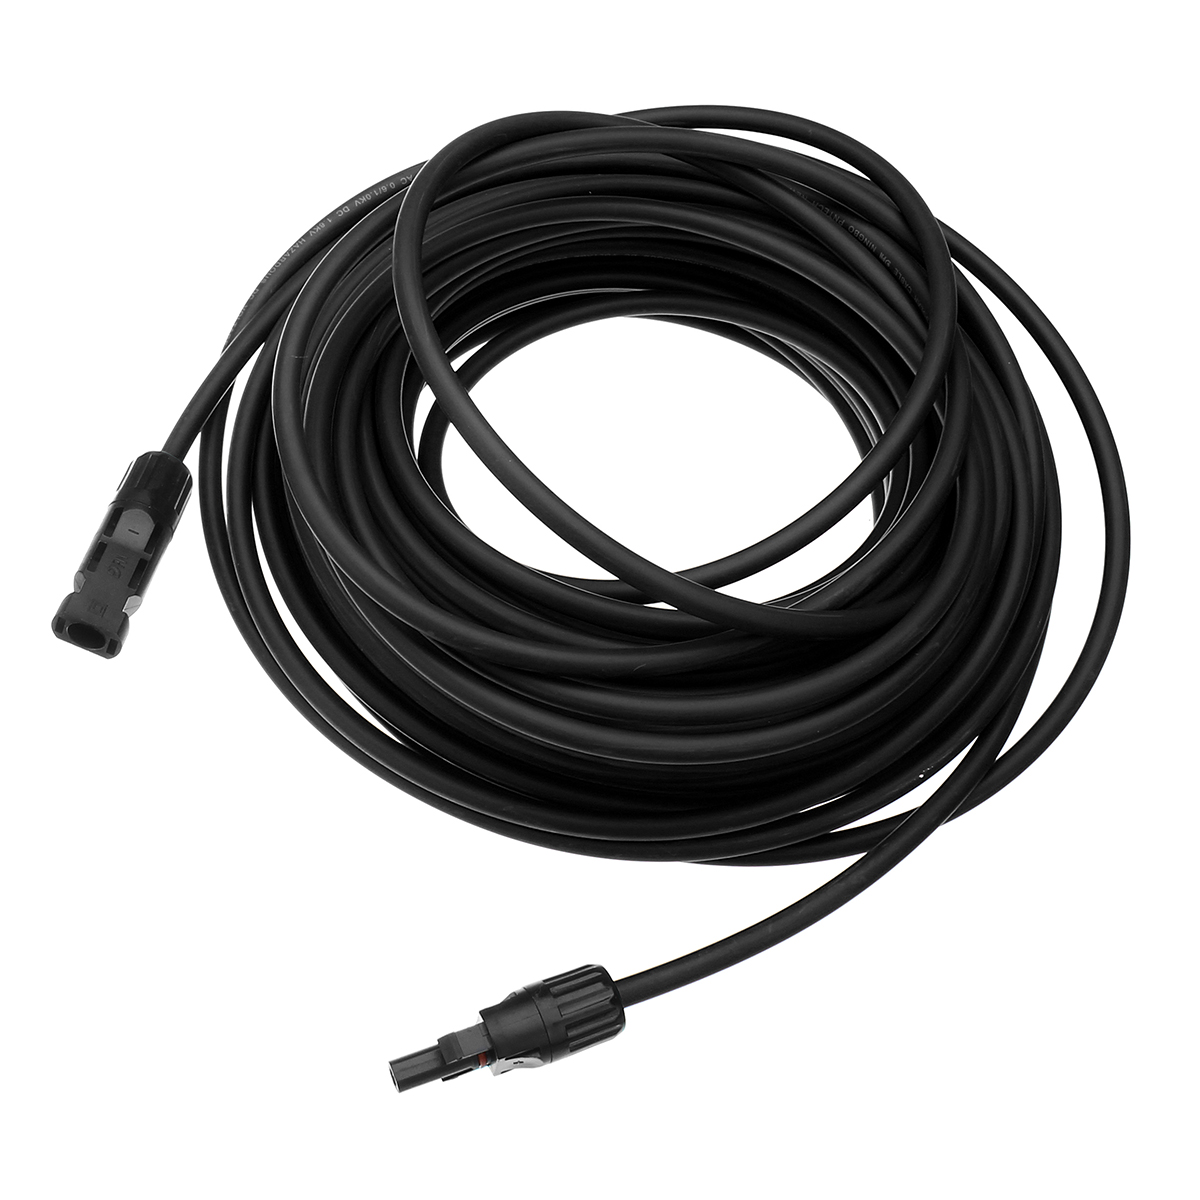 10-AWG-10-Meter-Solar-Panel-Extension-Cable-Wire-BlackRed-with-MC4-Connectors-1338696-2